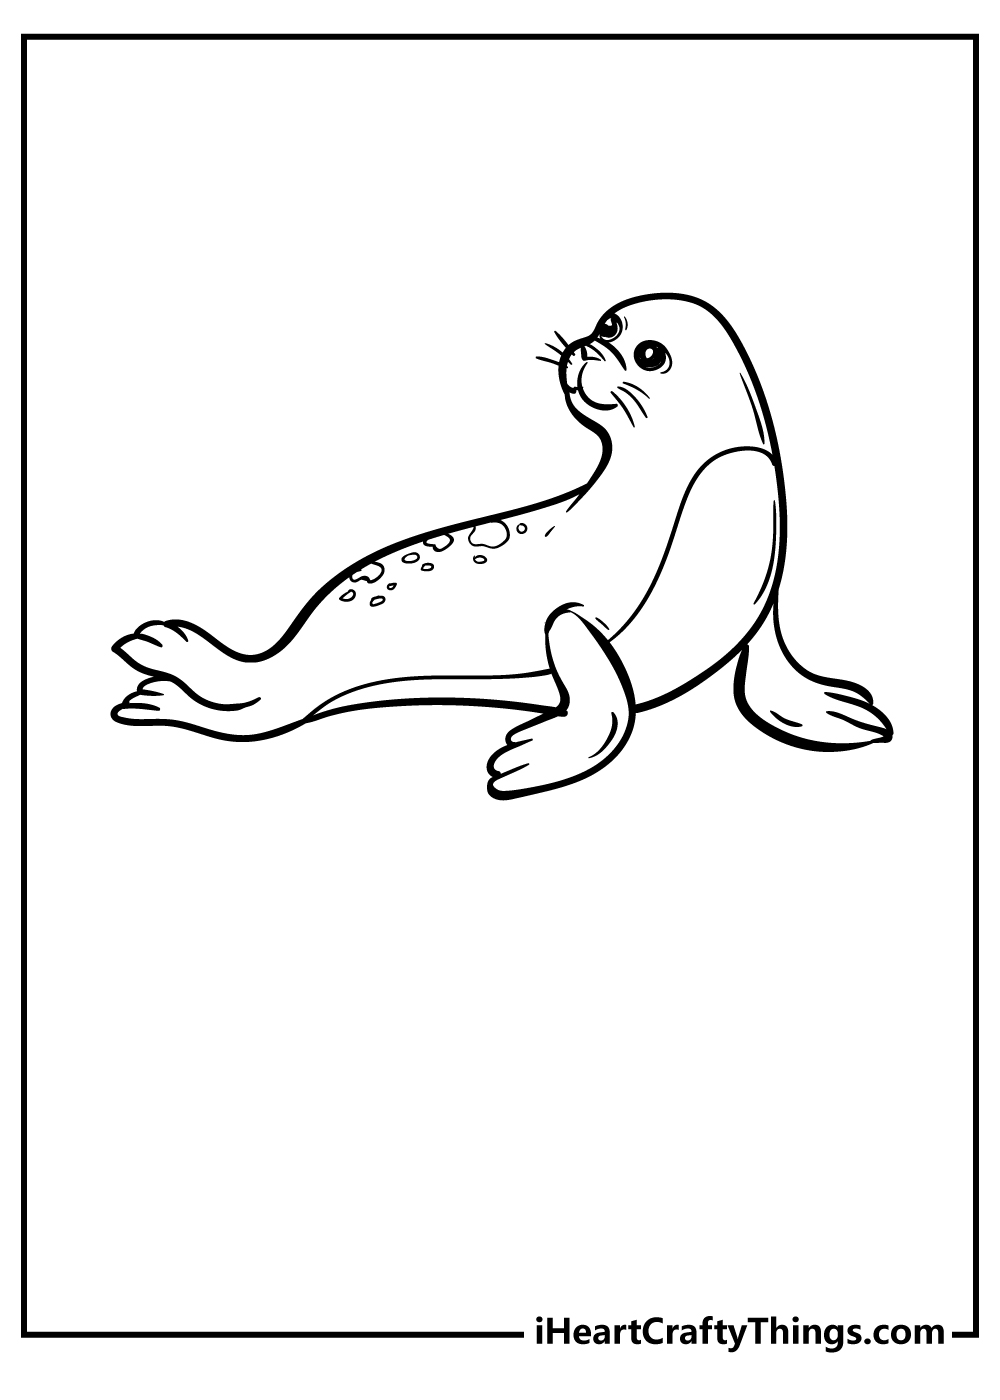 Seal Coloring Pages for kids free download